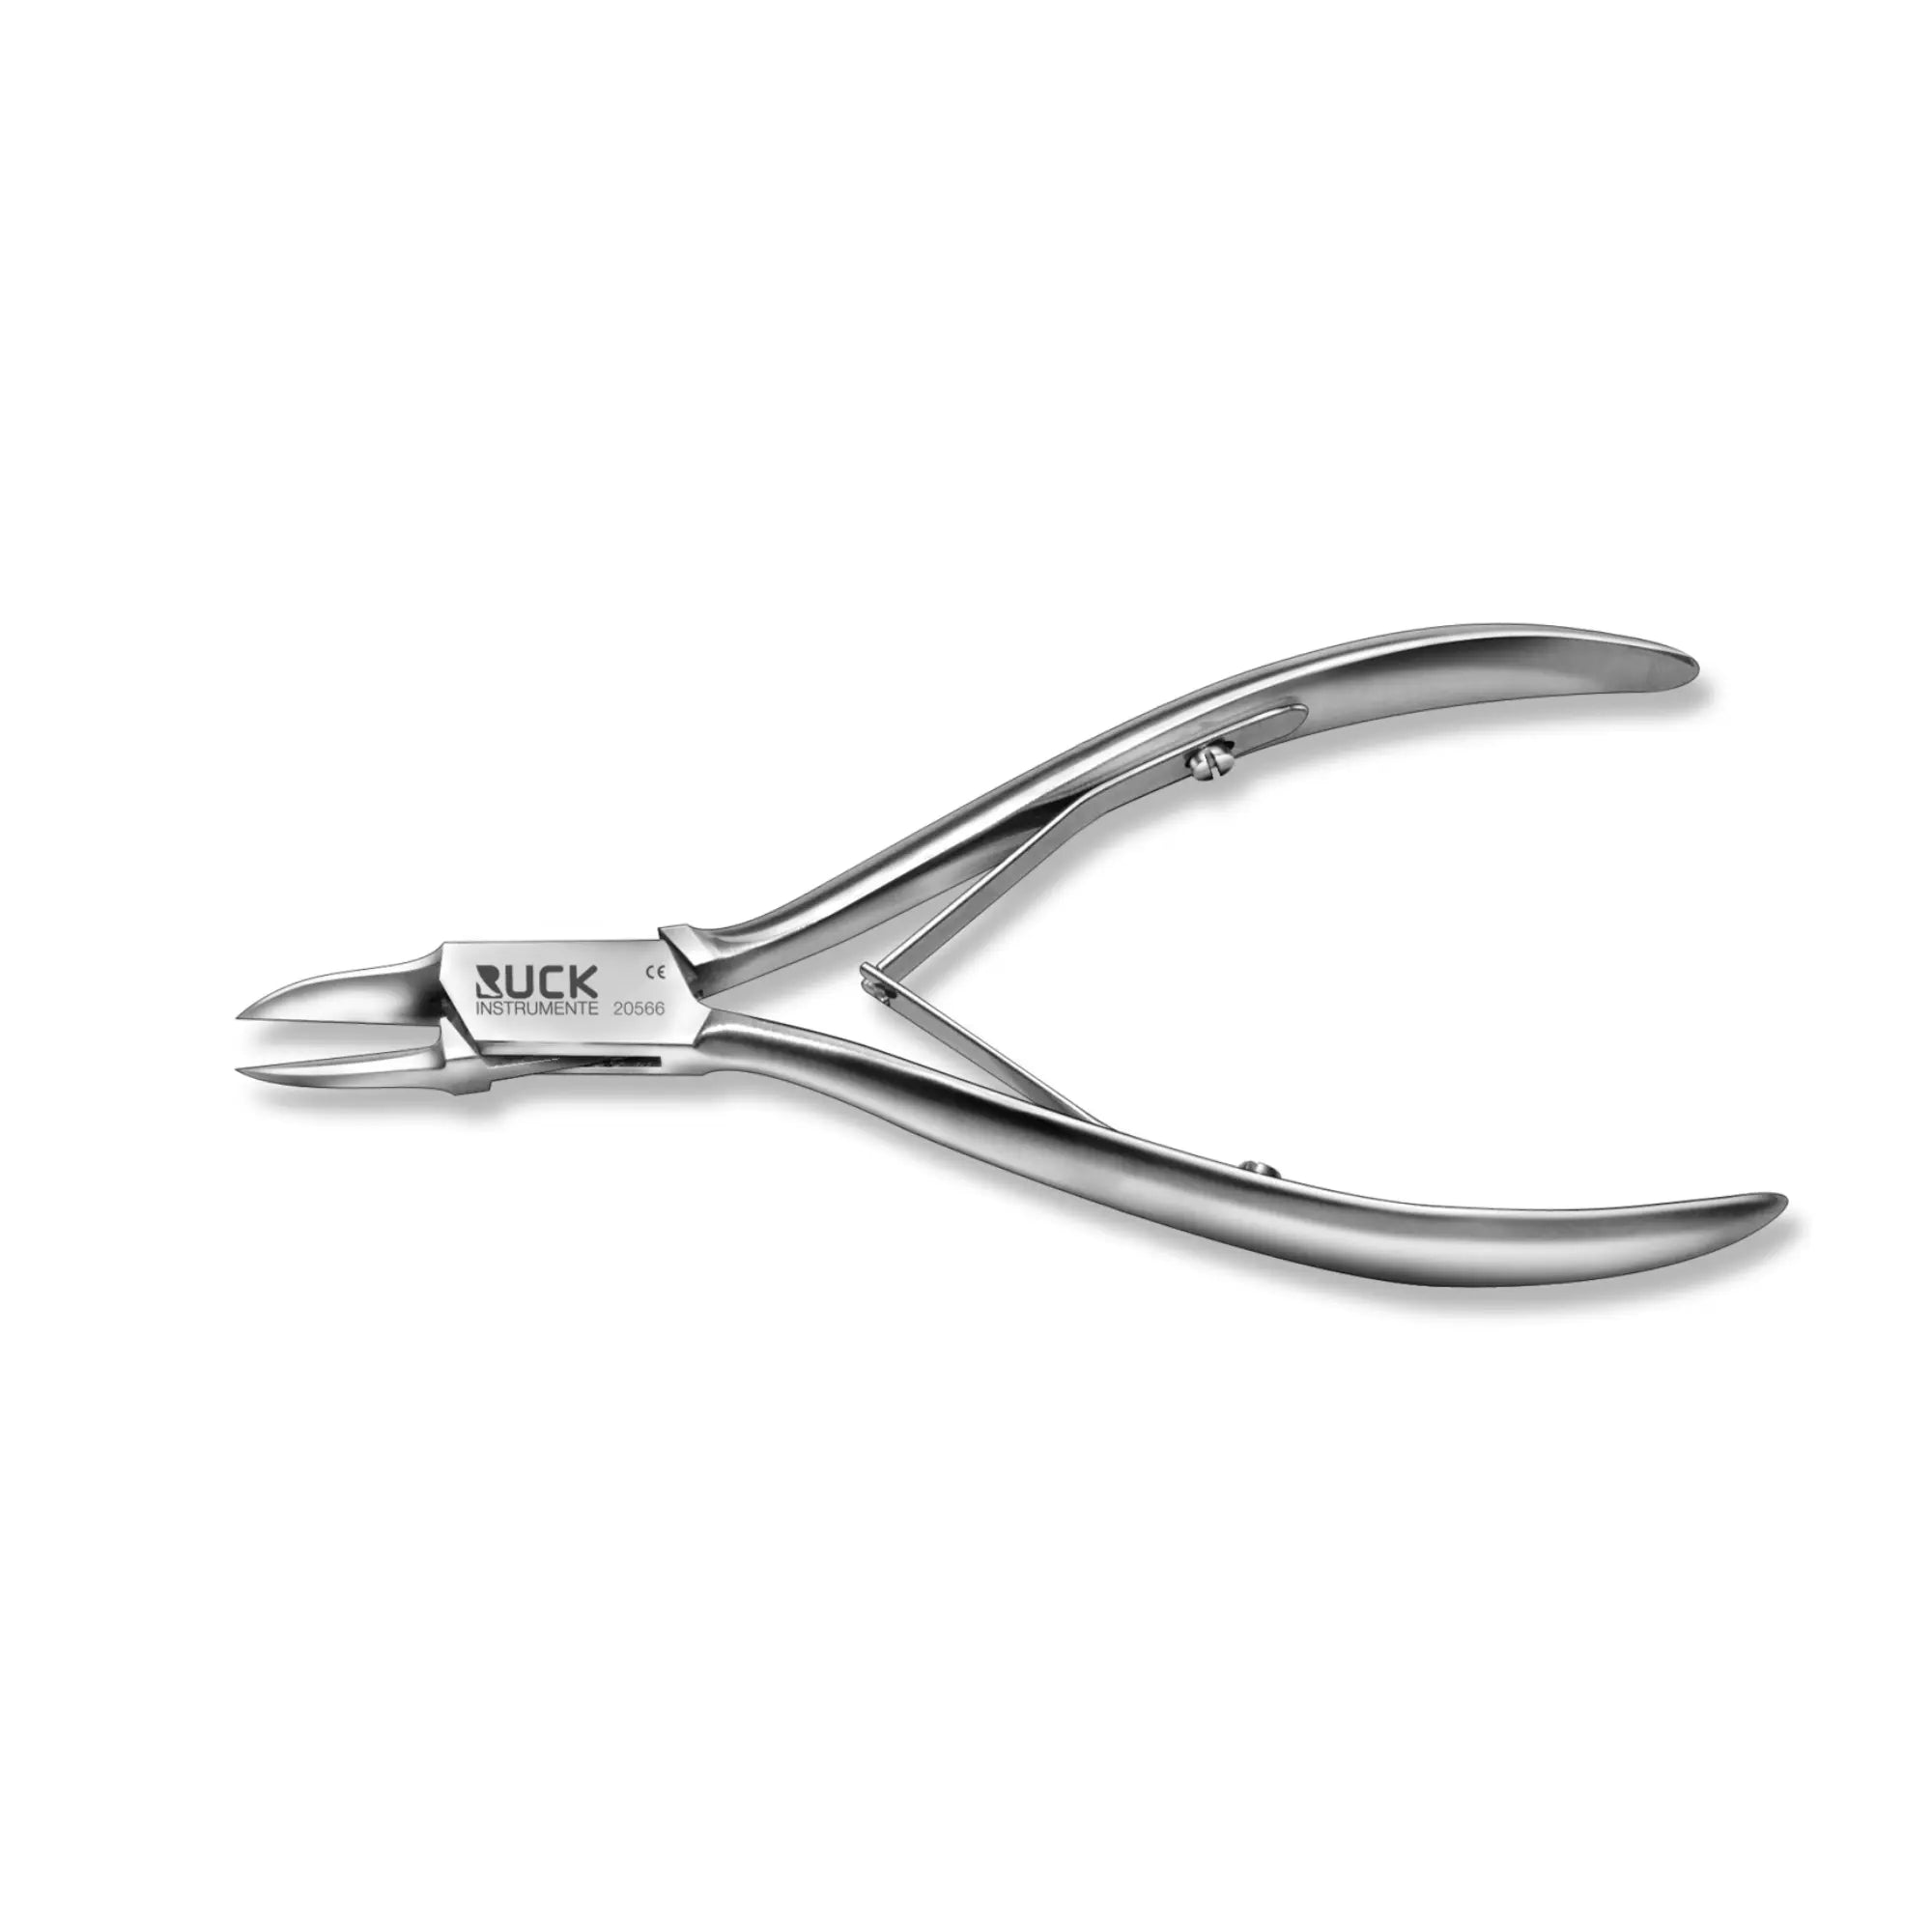 Pince à ongles - Coupe droite 17 mm - Mors plats - 13 cm - Ruck Ruck